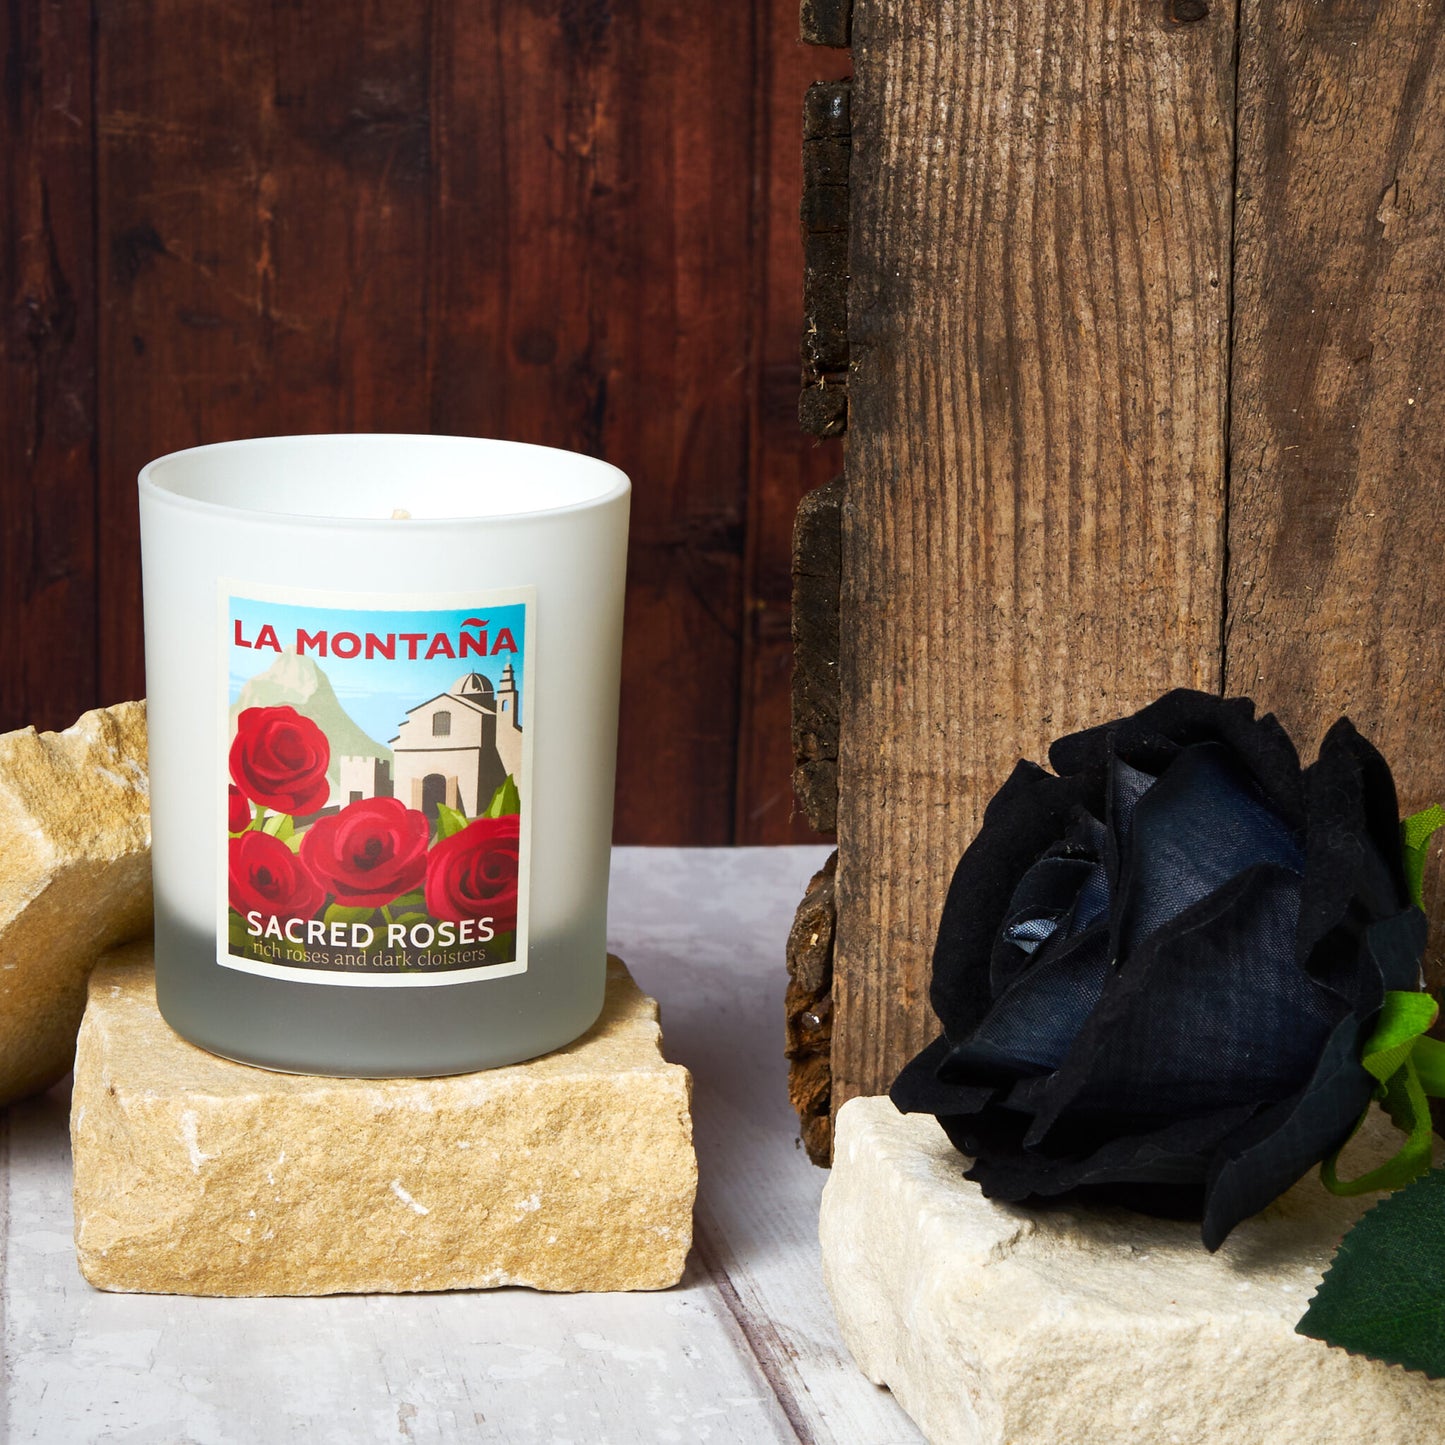 La Montaña Sacred Roses Scented Candle - Osmology Scented Candles & Home Fragrance